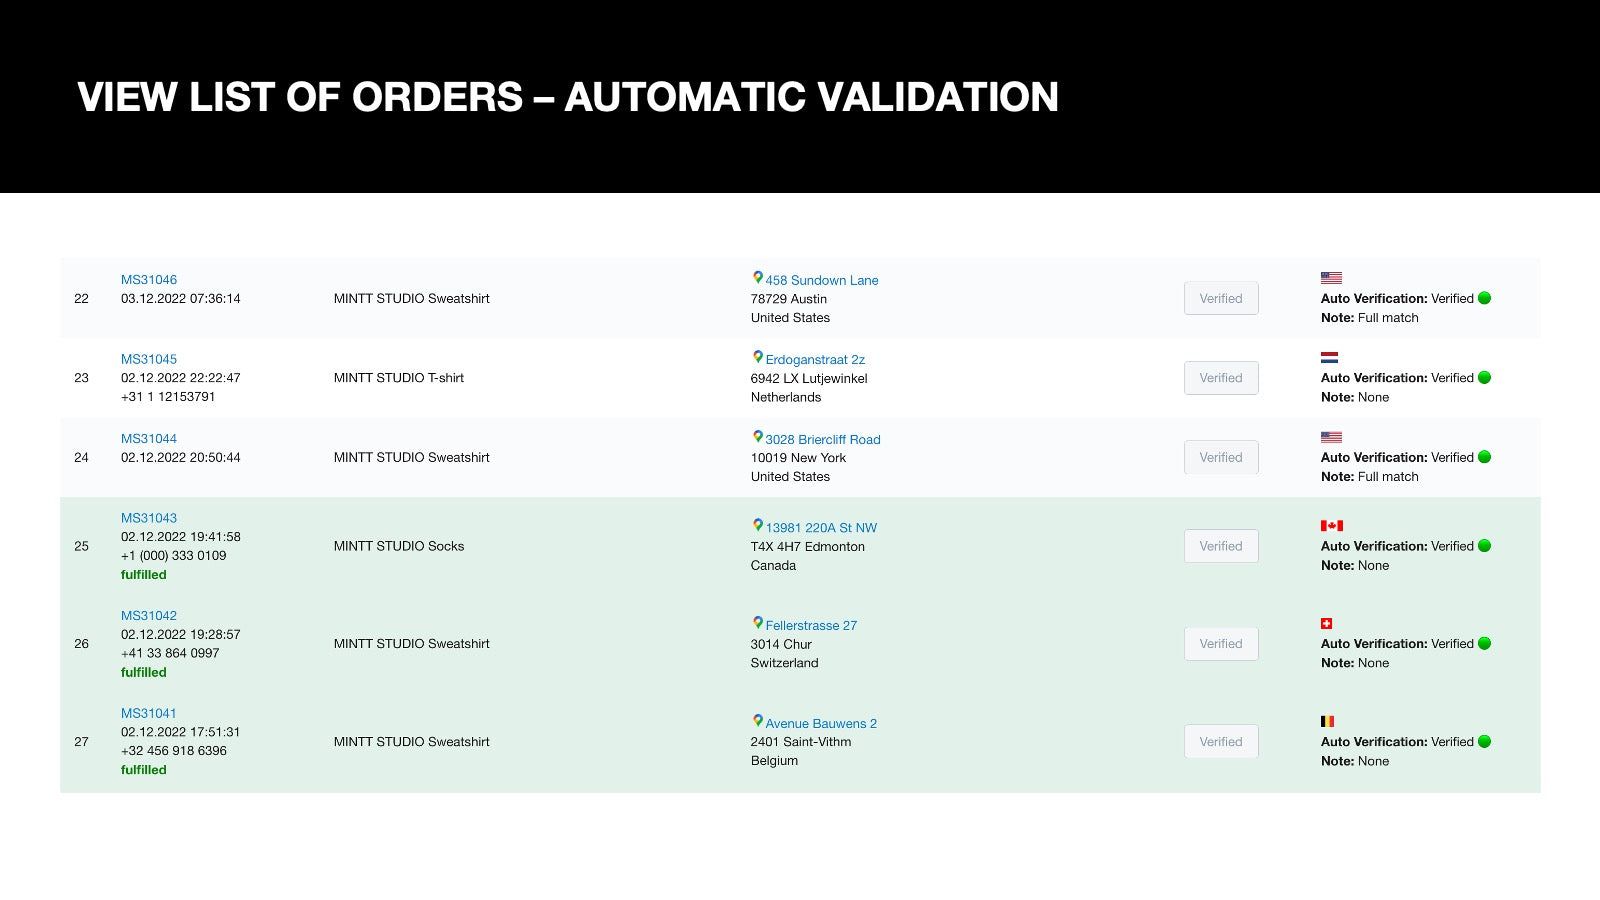 View list of orders - automatic validation